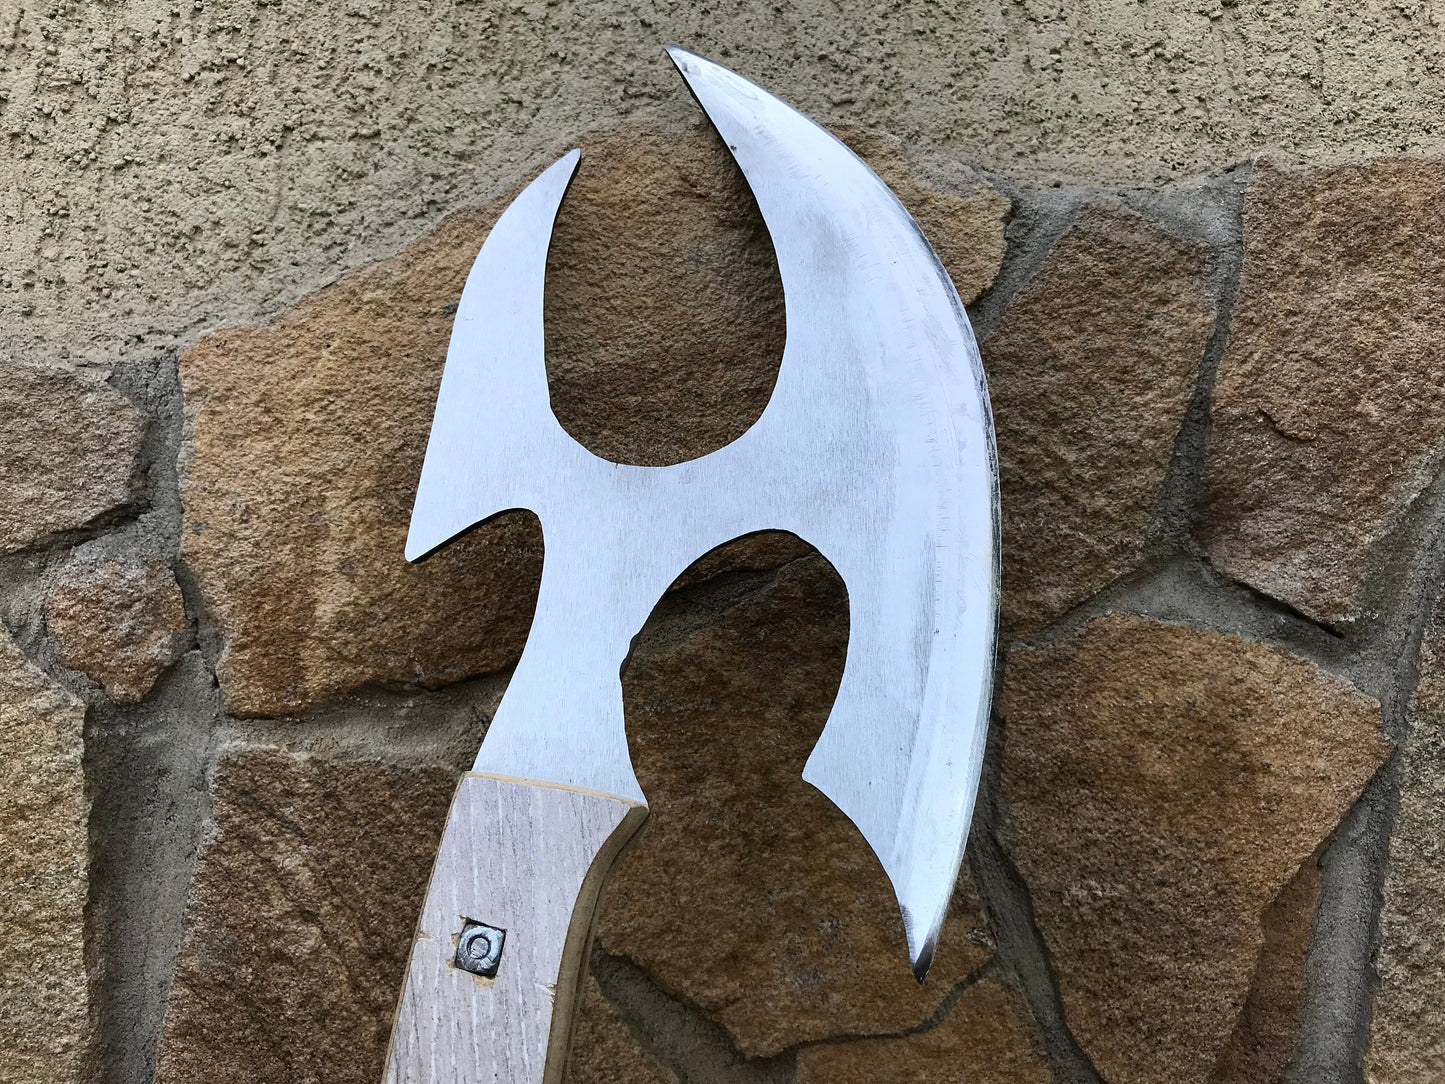 Kitchen axe, viking axe, axe, tomahawk, ax, hatchet, knife, iron gifts, manly gift, mens gift, medieval axe ,viking camp kit, viking gifts